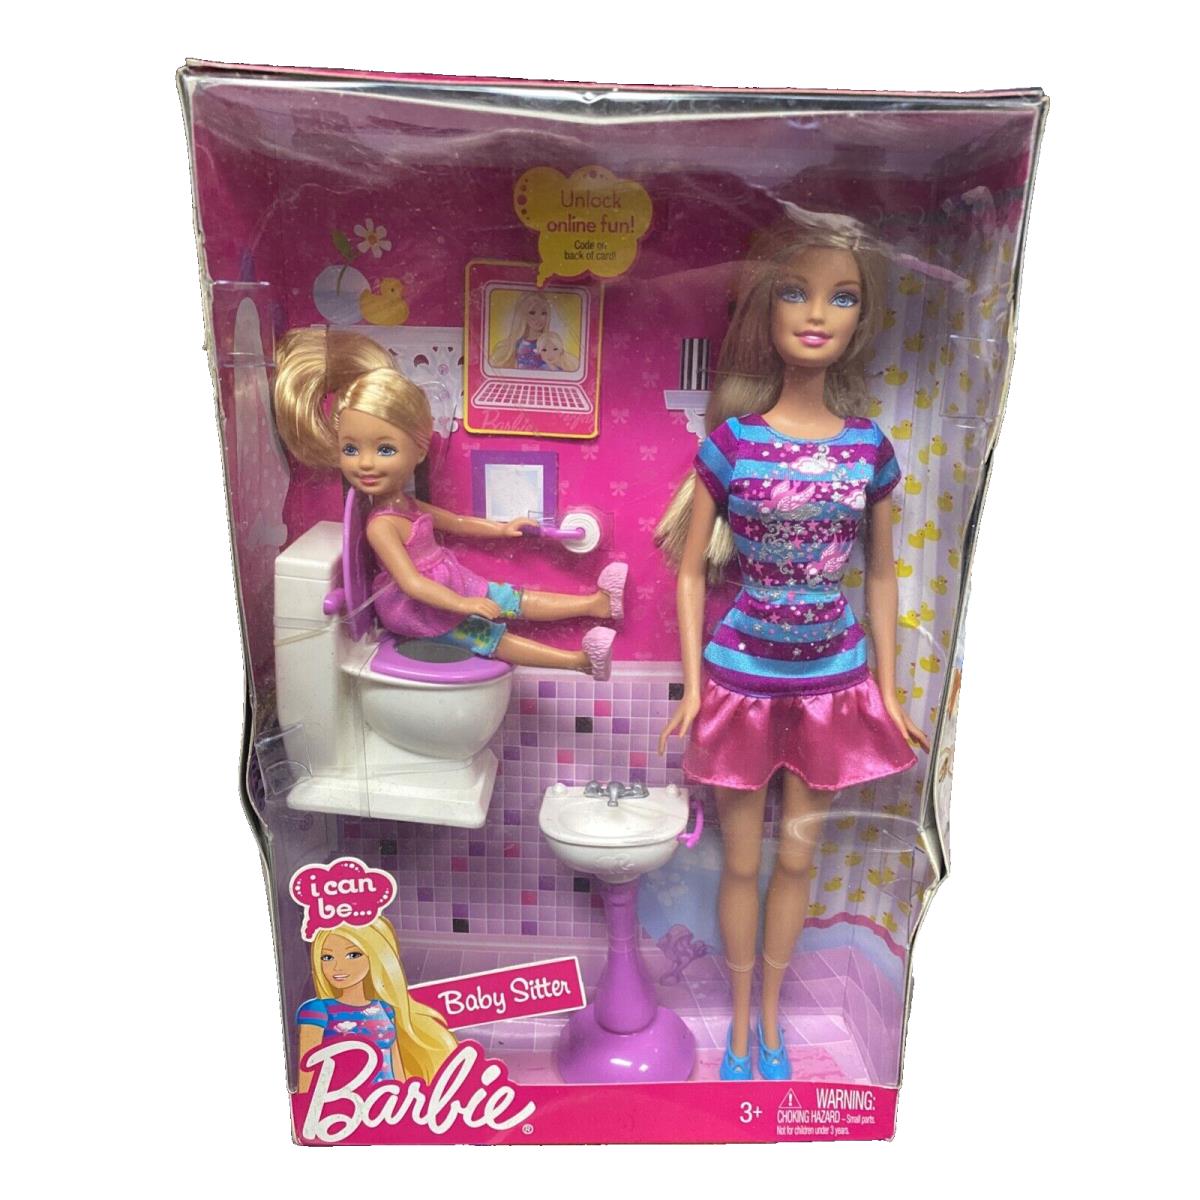 Barbie I Can Be Baby Sitter Potty Training 2010 R4303 Mattel